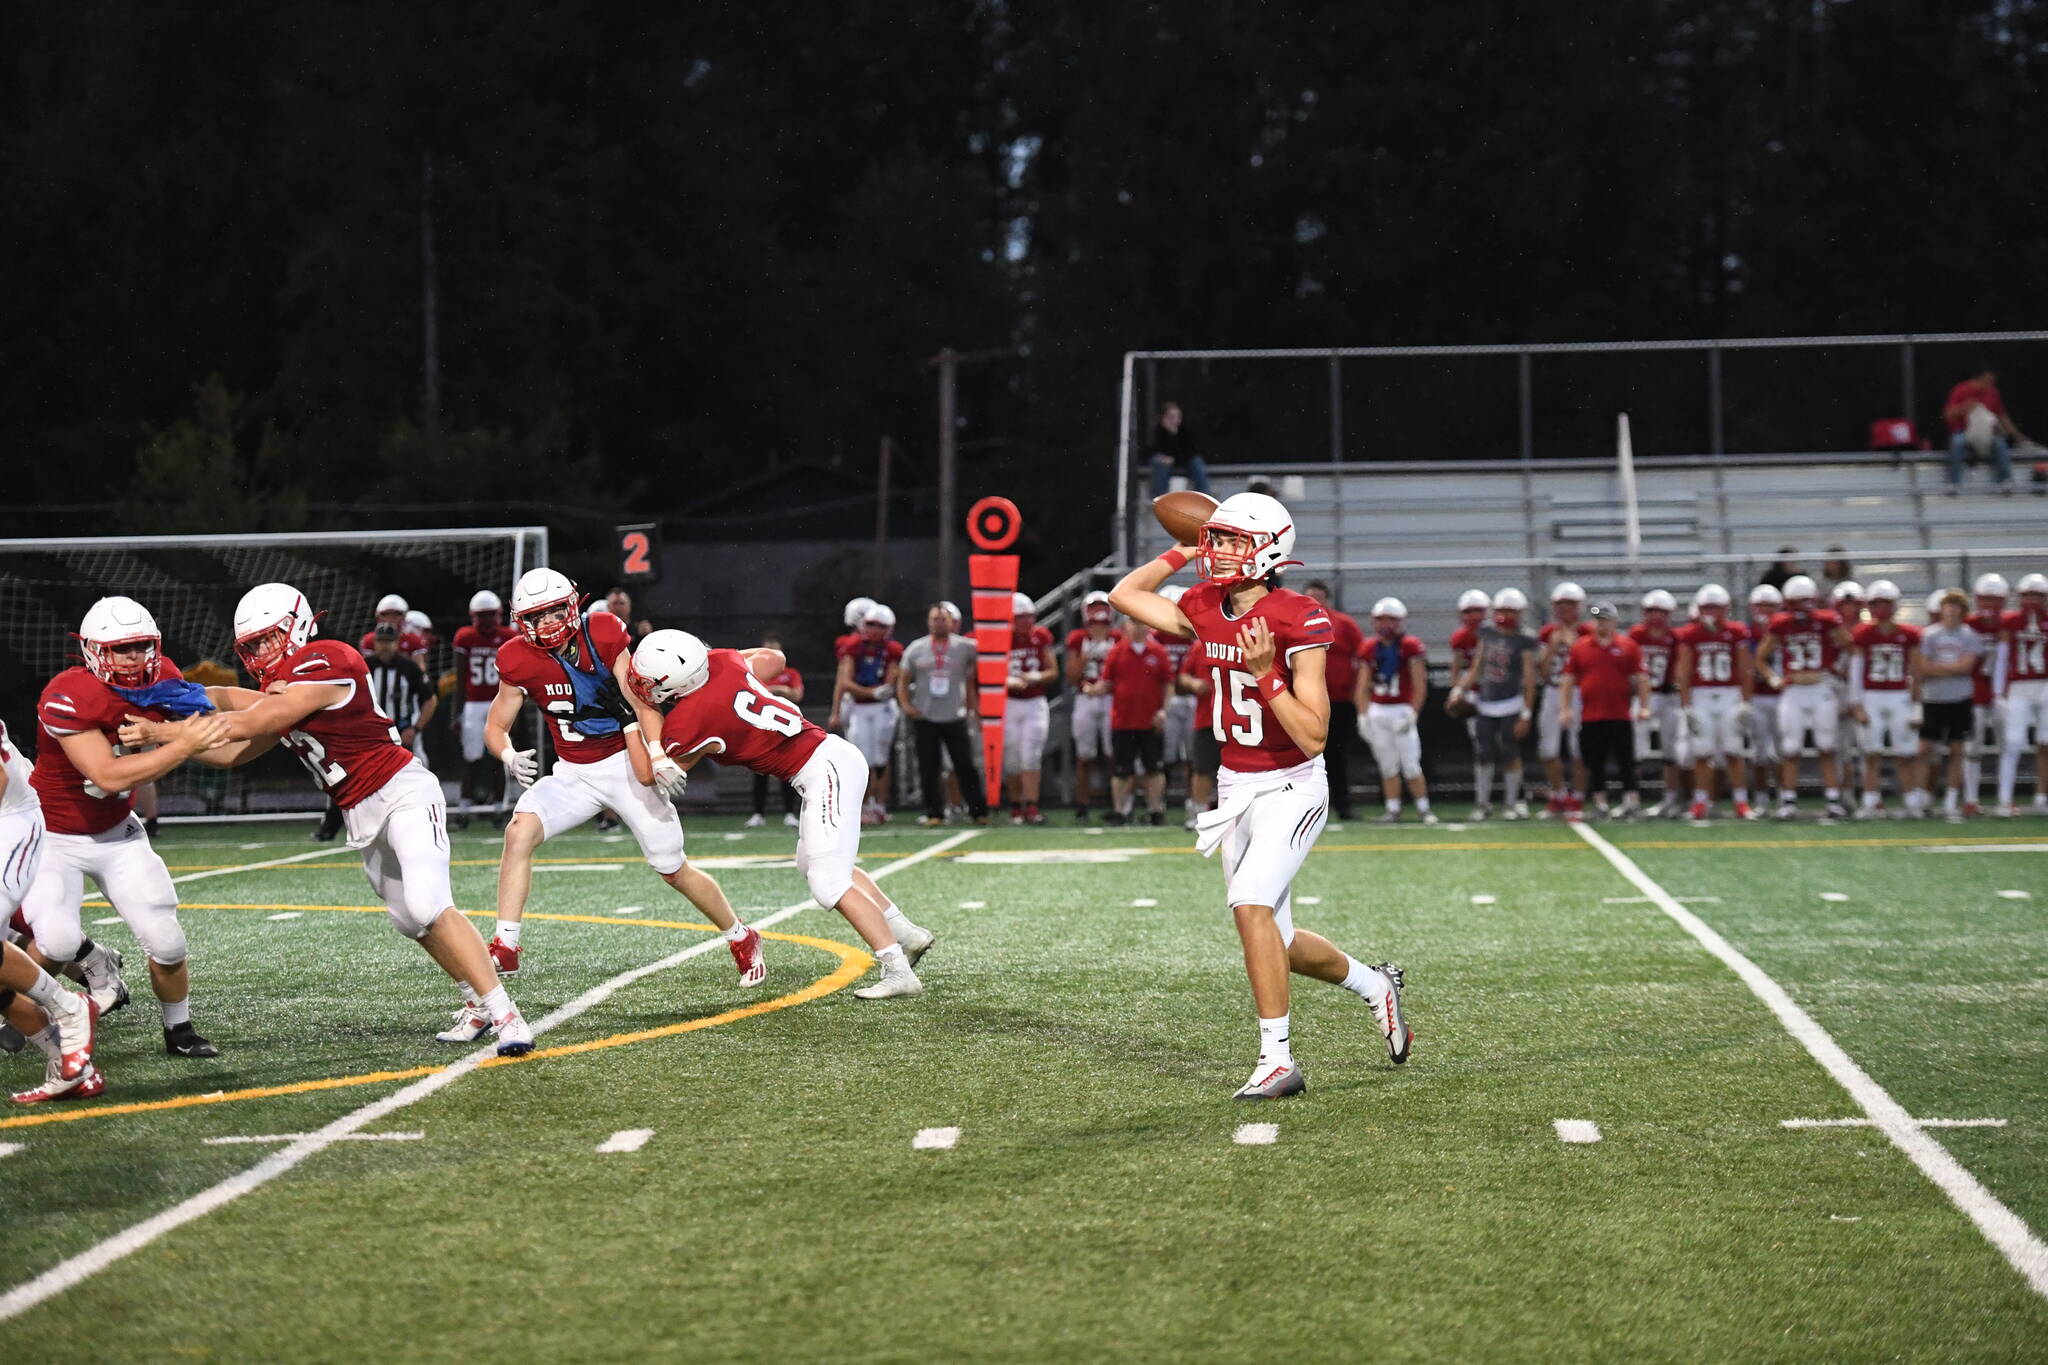 Senior Quarterback Cyrus Turley throws a pass in an inter-squad game on Aug. 26. Photo Courtesy of Calder Productions